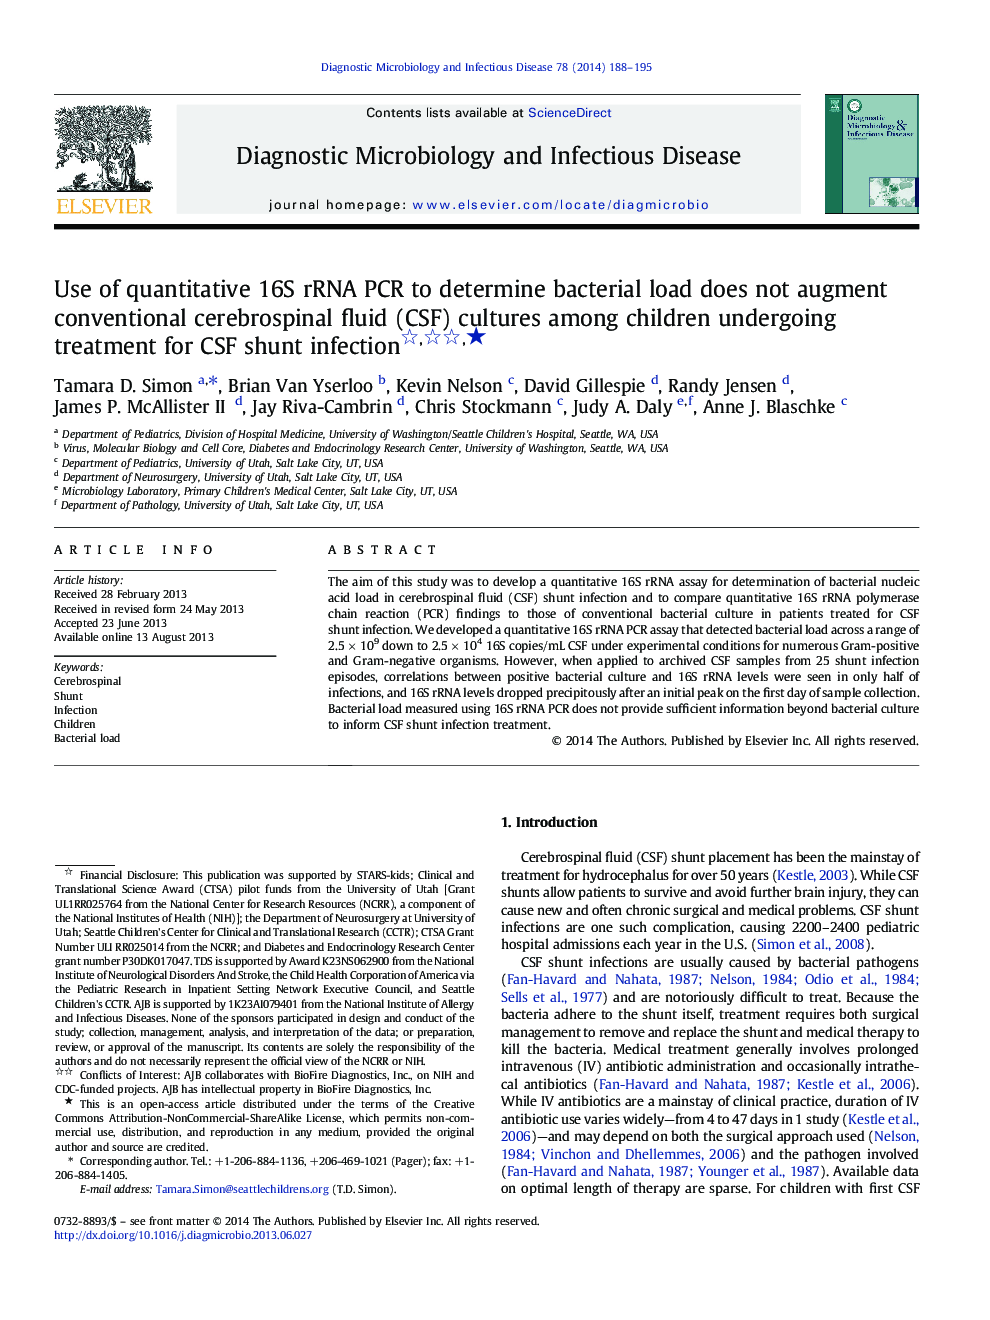 Use of quantitative 16S rRNA PCR to determine bacterial load does not augment conventional cerebrospinal fluid (CSF) cultures among children undergoing treatment for CSF shunt infection